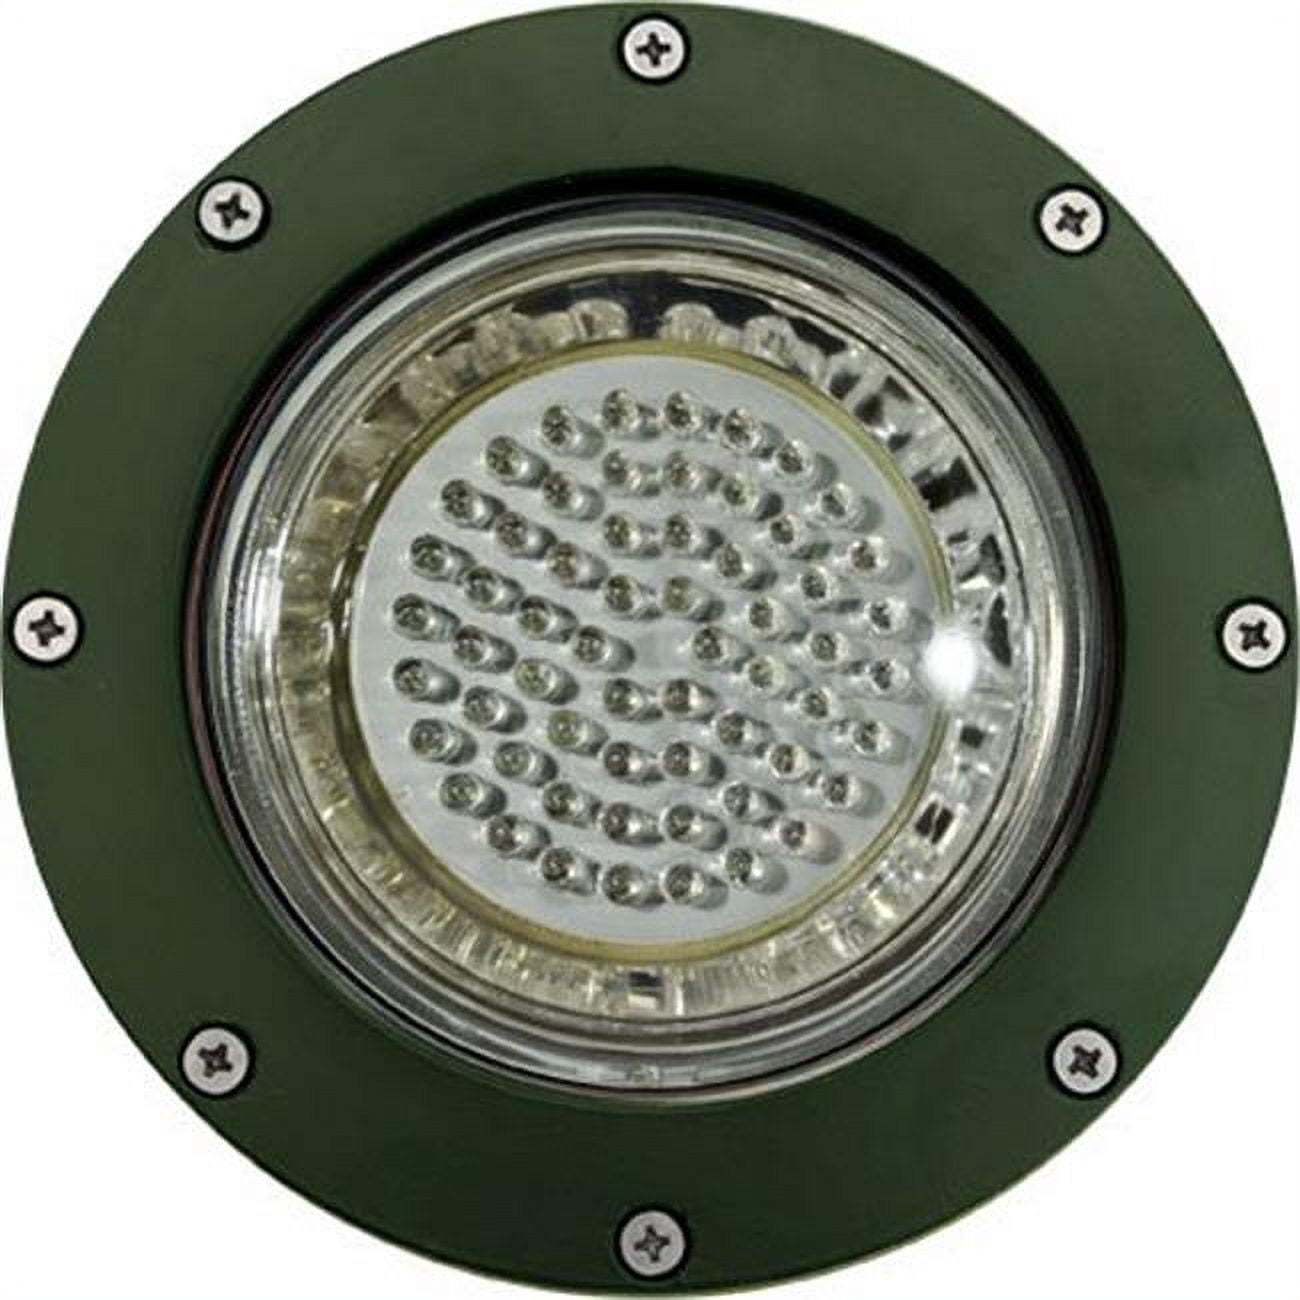 Picture of Dabmar Lighting LV306-LED3-G-MR Cast Aluminum LED In-Ground Well Light with PVC Sleeve, Green - 6.50 x 7.75 x 7.75 in.